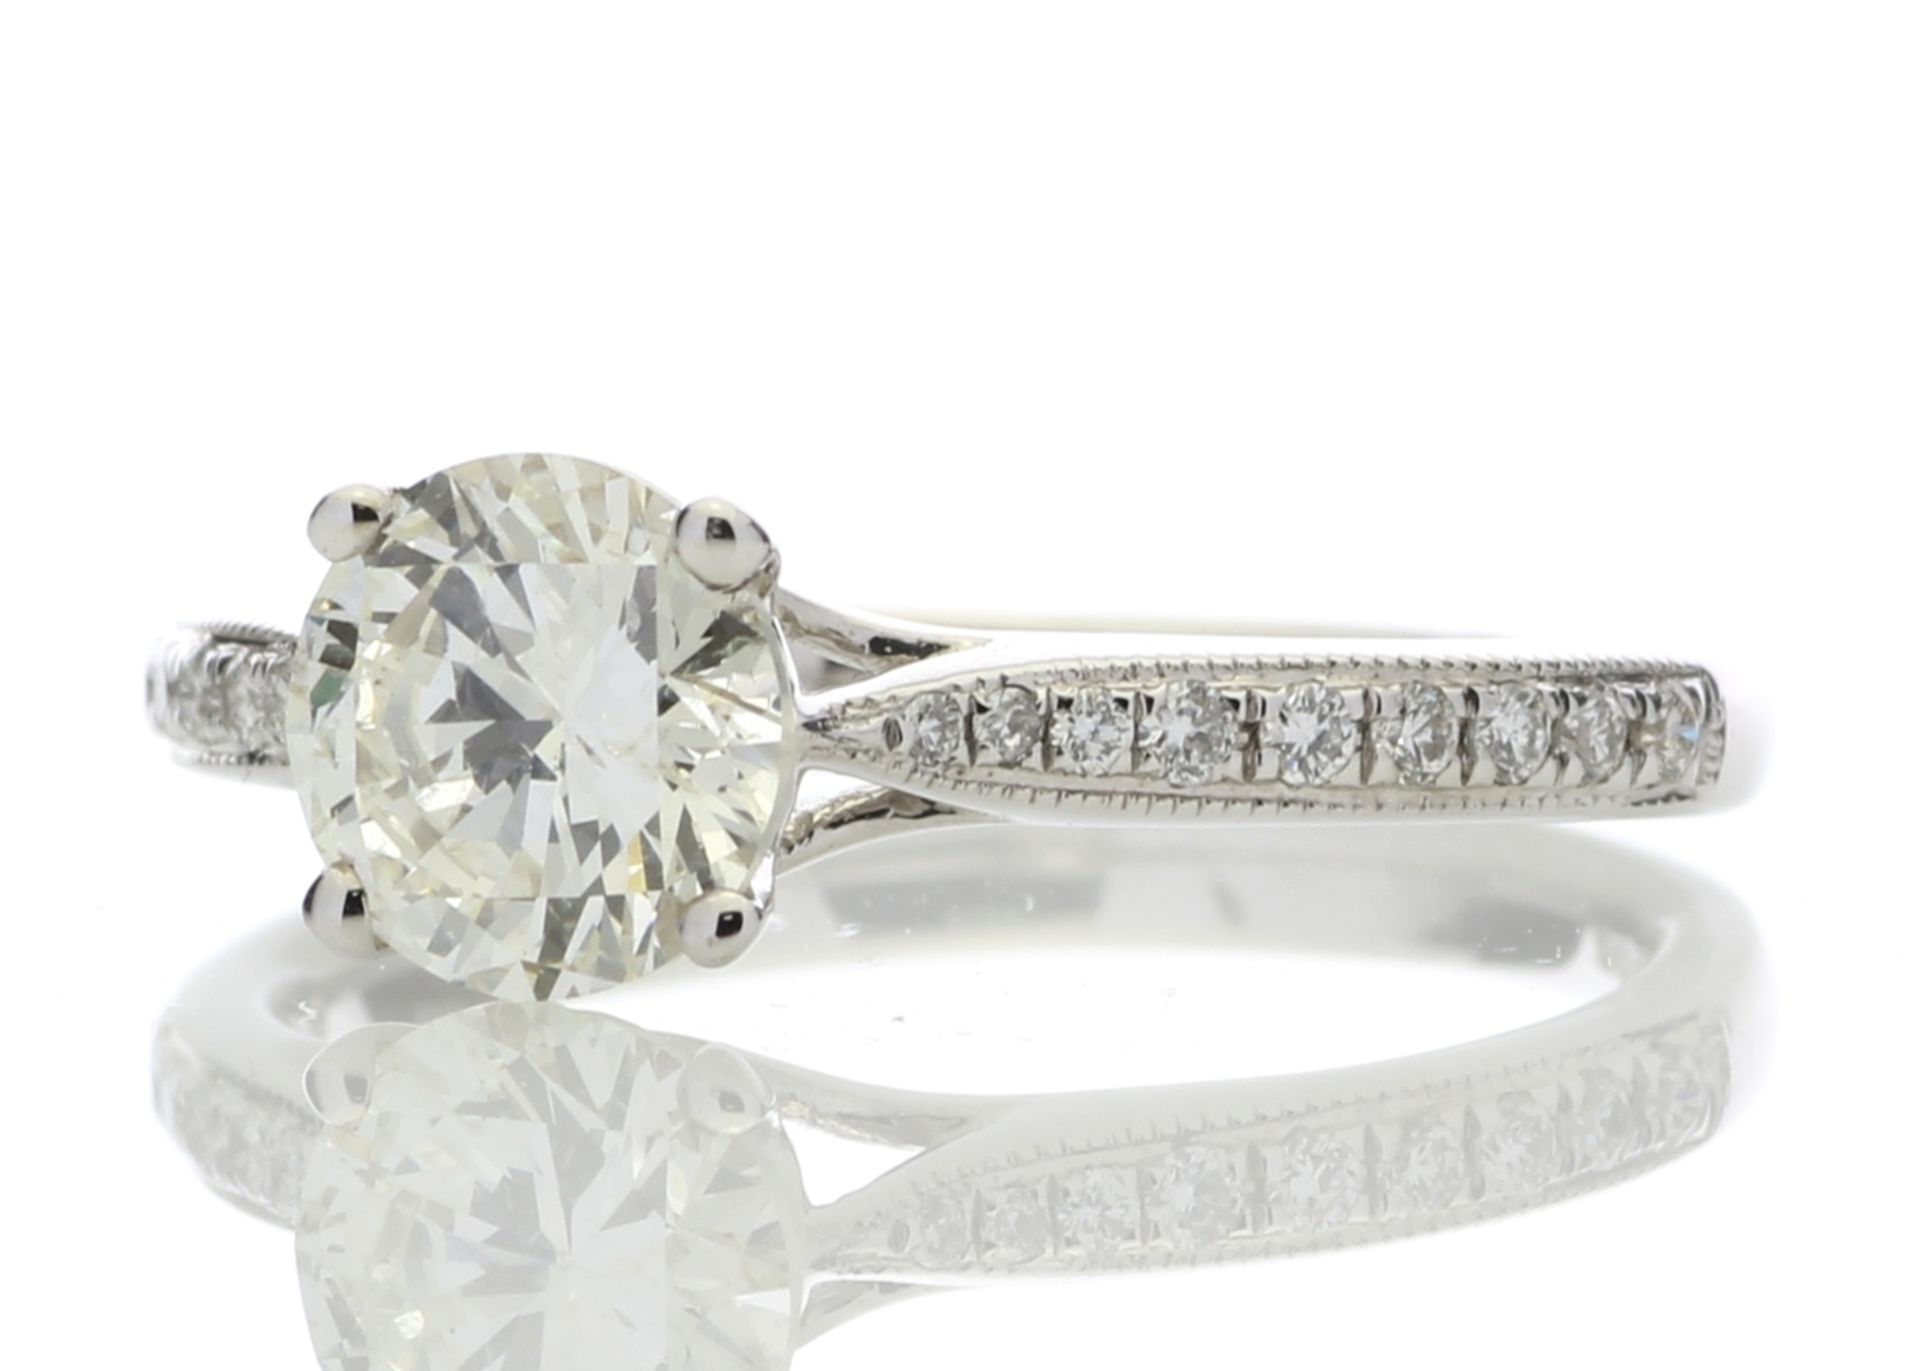 18ct White Gold Diamond Ring With Stone Set Shoulders 1.15 Carats - Valued By GIE £26,750.00 - One - Image 2 of 5